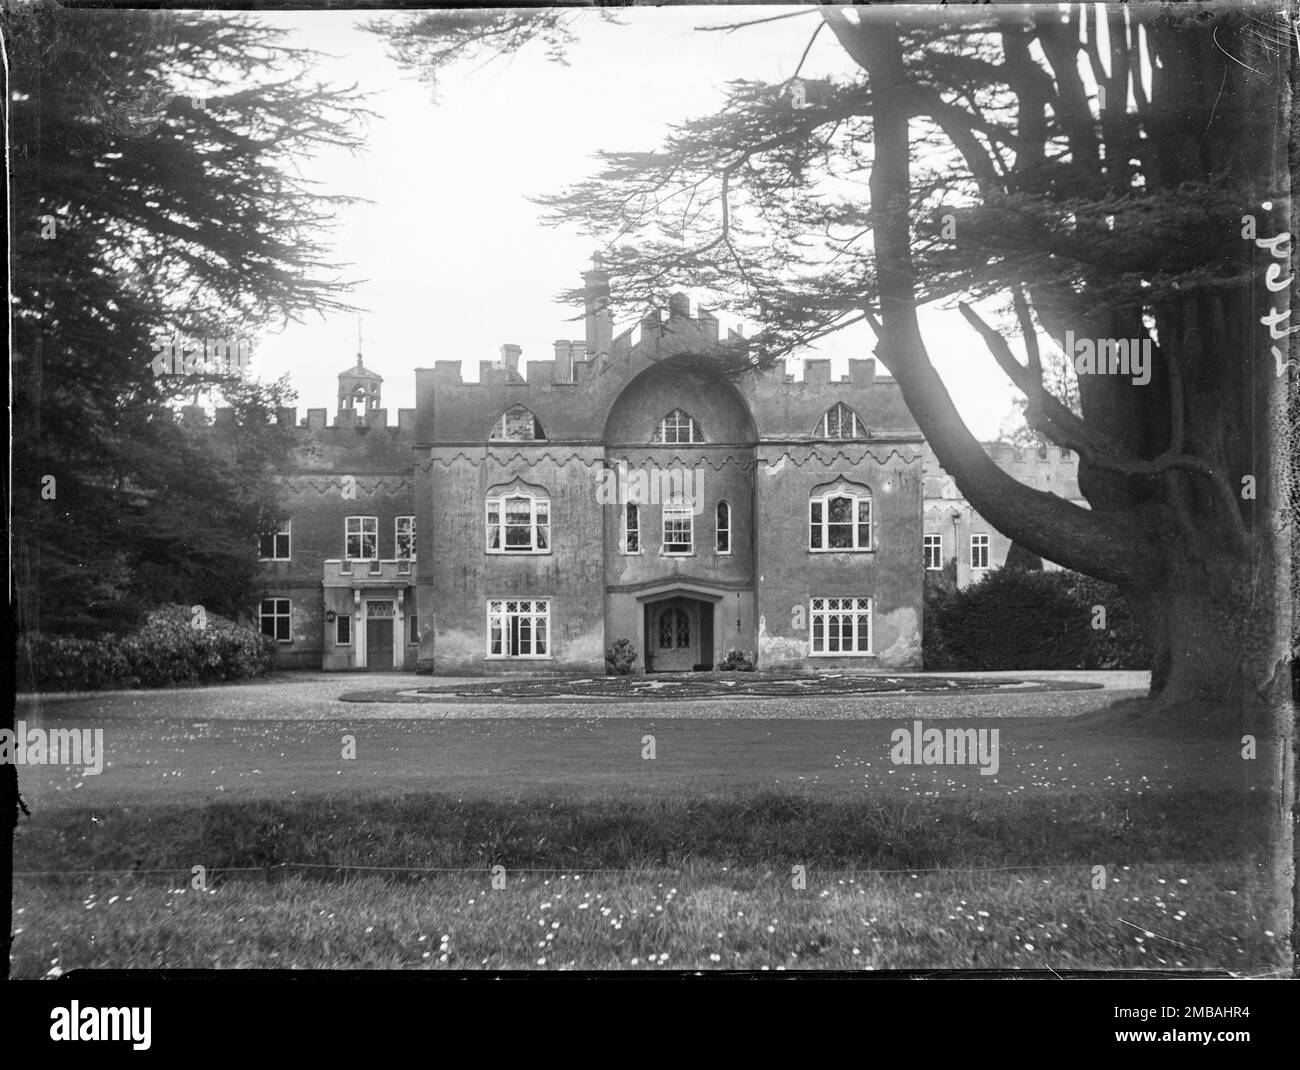 Hampden House, Great Hampden, Great and Little Hampden, Wycombe, Buckinghamshire, 1910. The main entrance at Hampden House seen from the west, with a cedar tree on the right of the foreground. Stock Photo